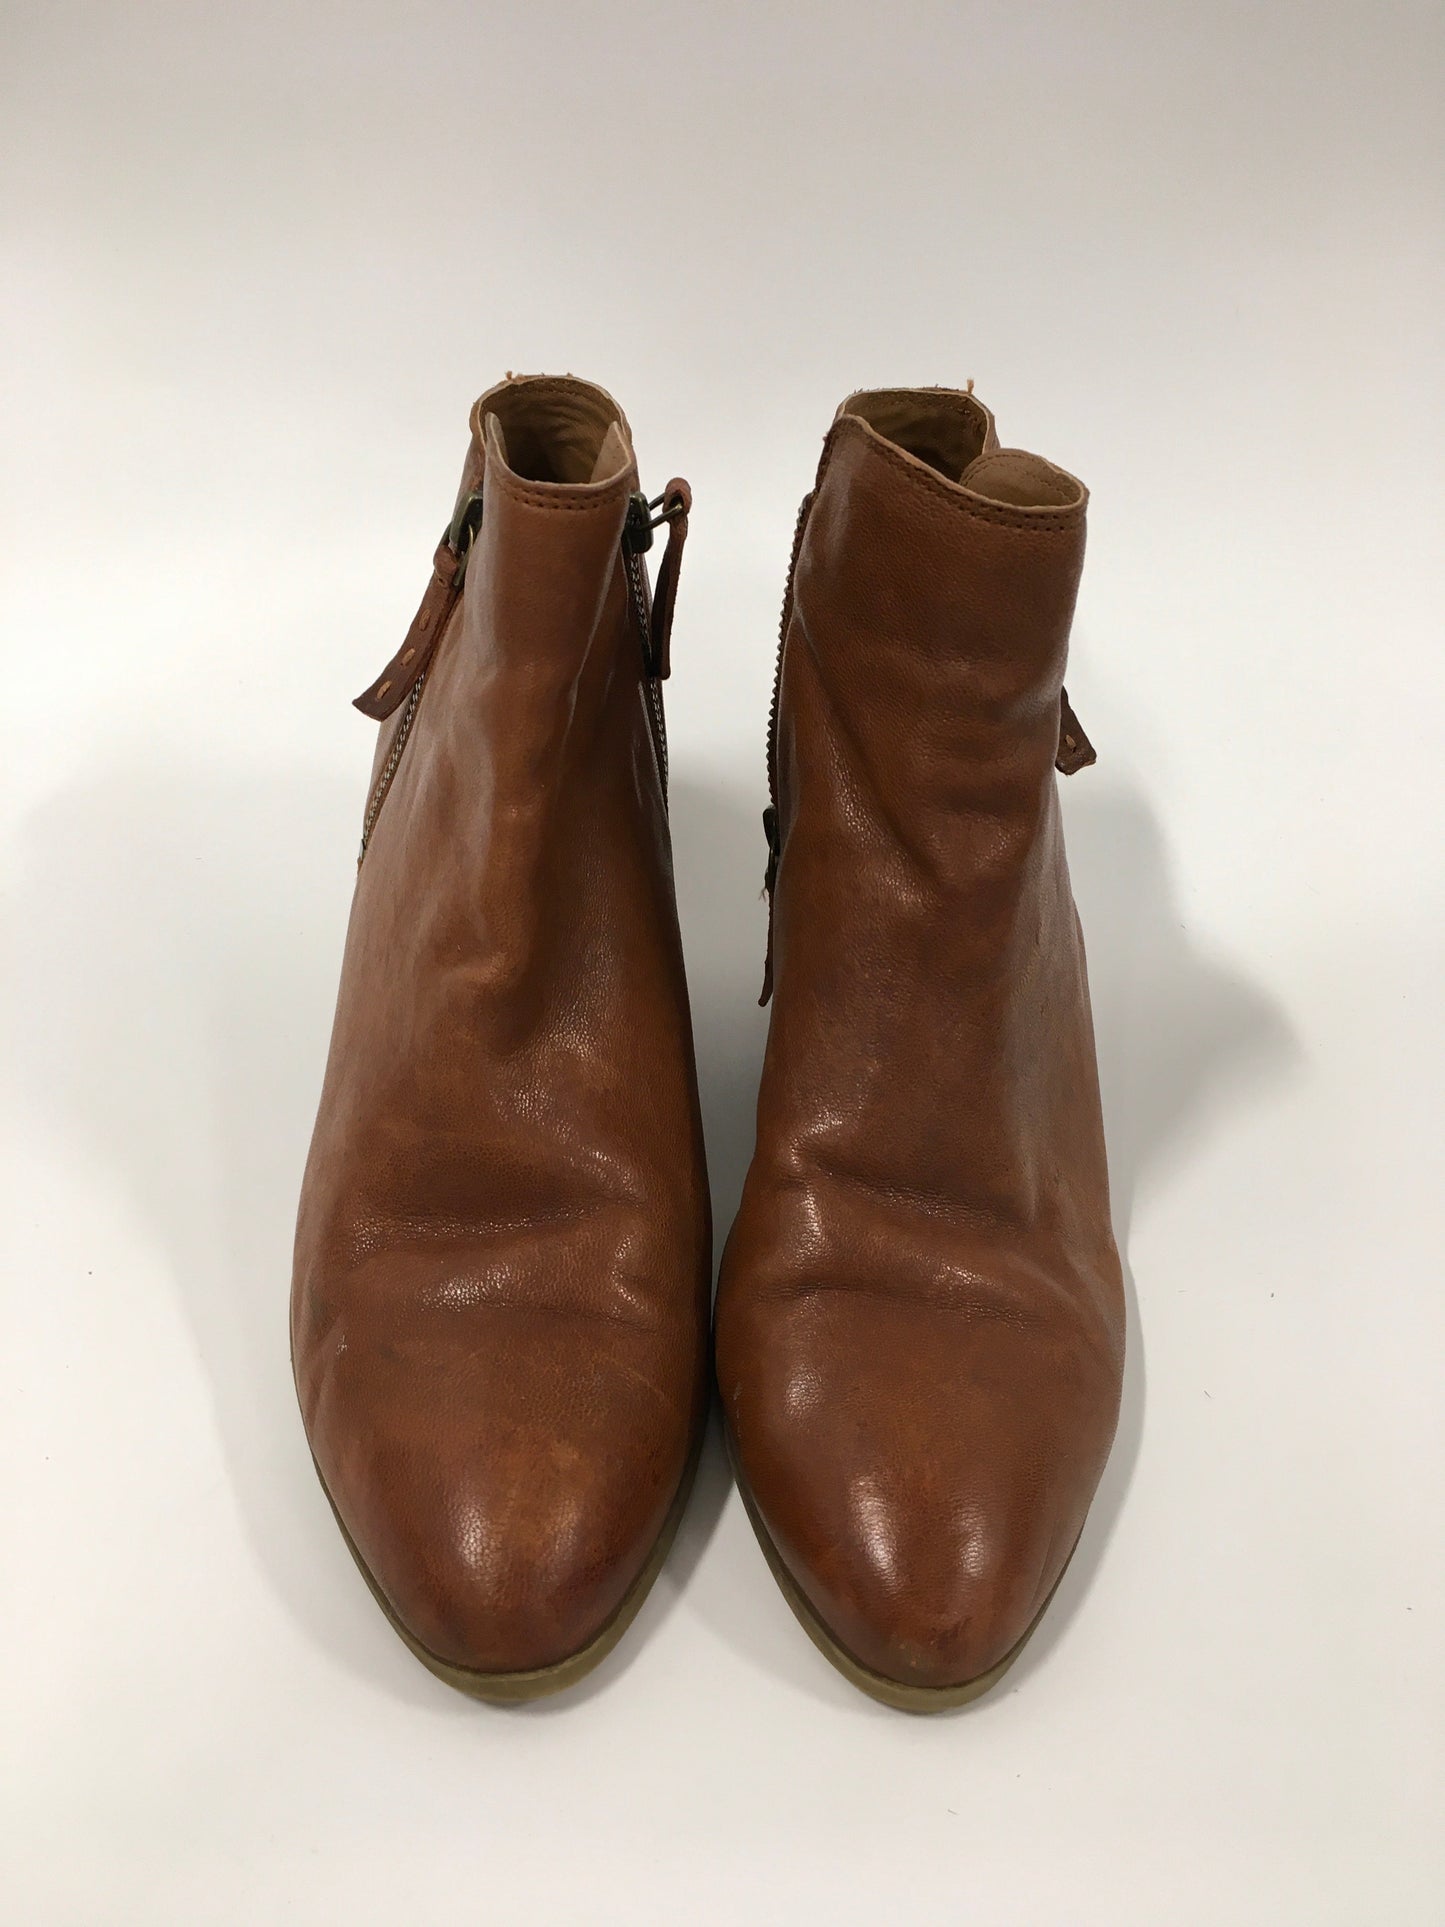 Brown Boots Ankle Heels Frye, Size 8.5